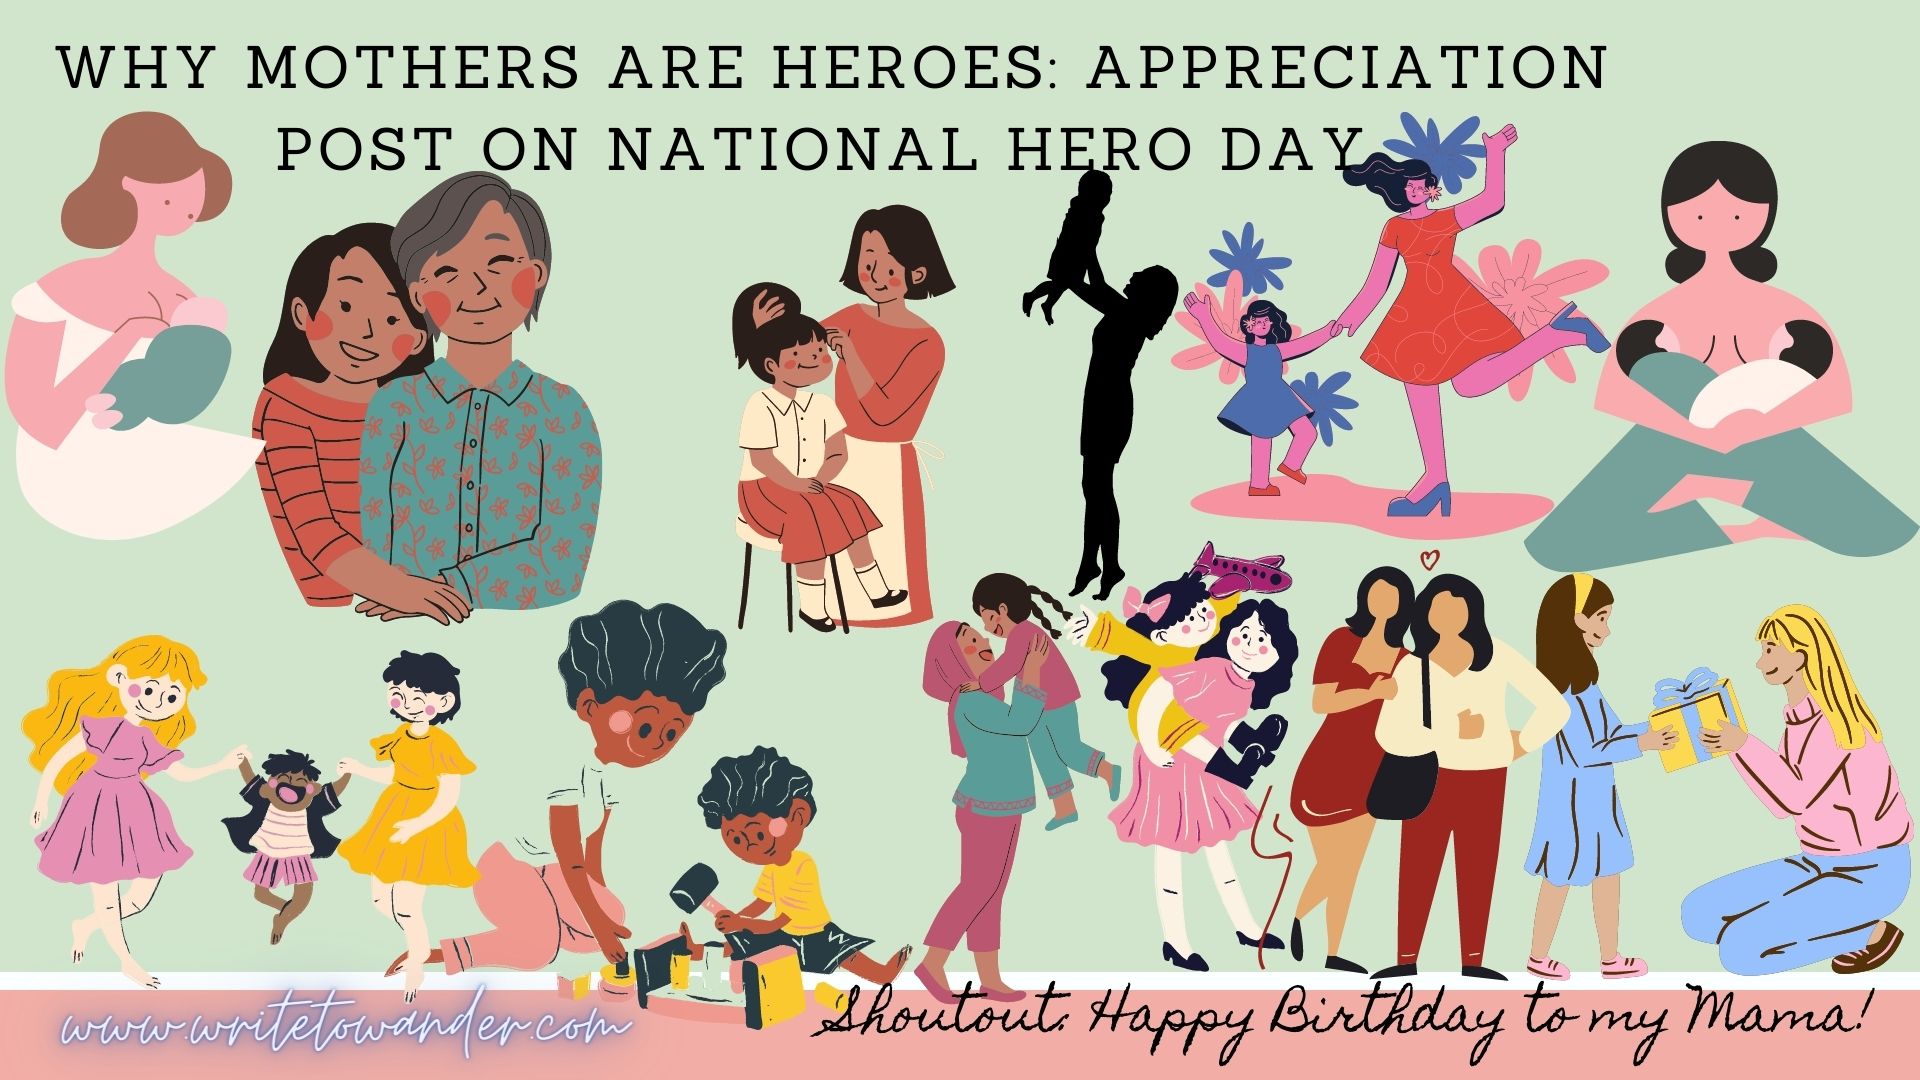 Why Mothers are Heroes Appreciation Post on National Hero Day.jpg